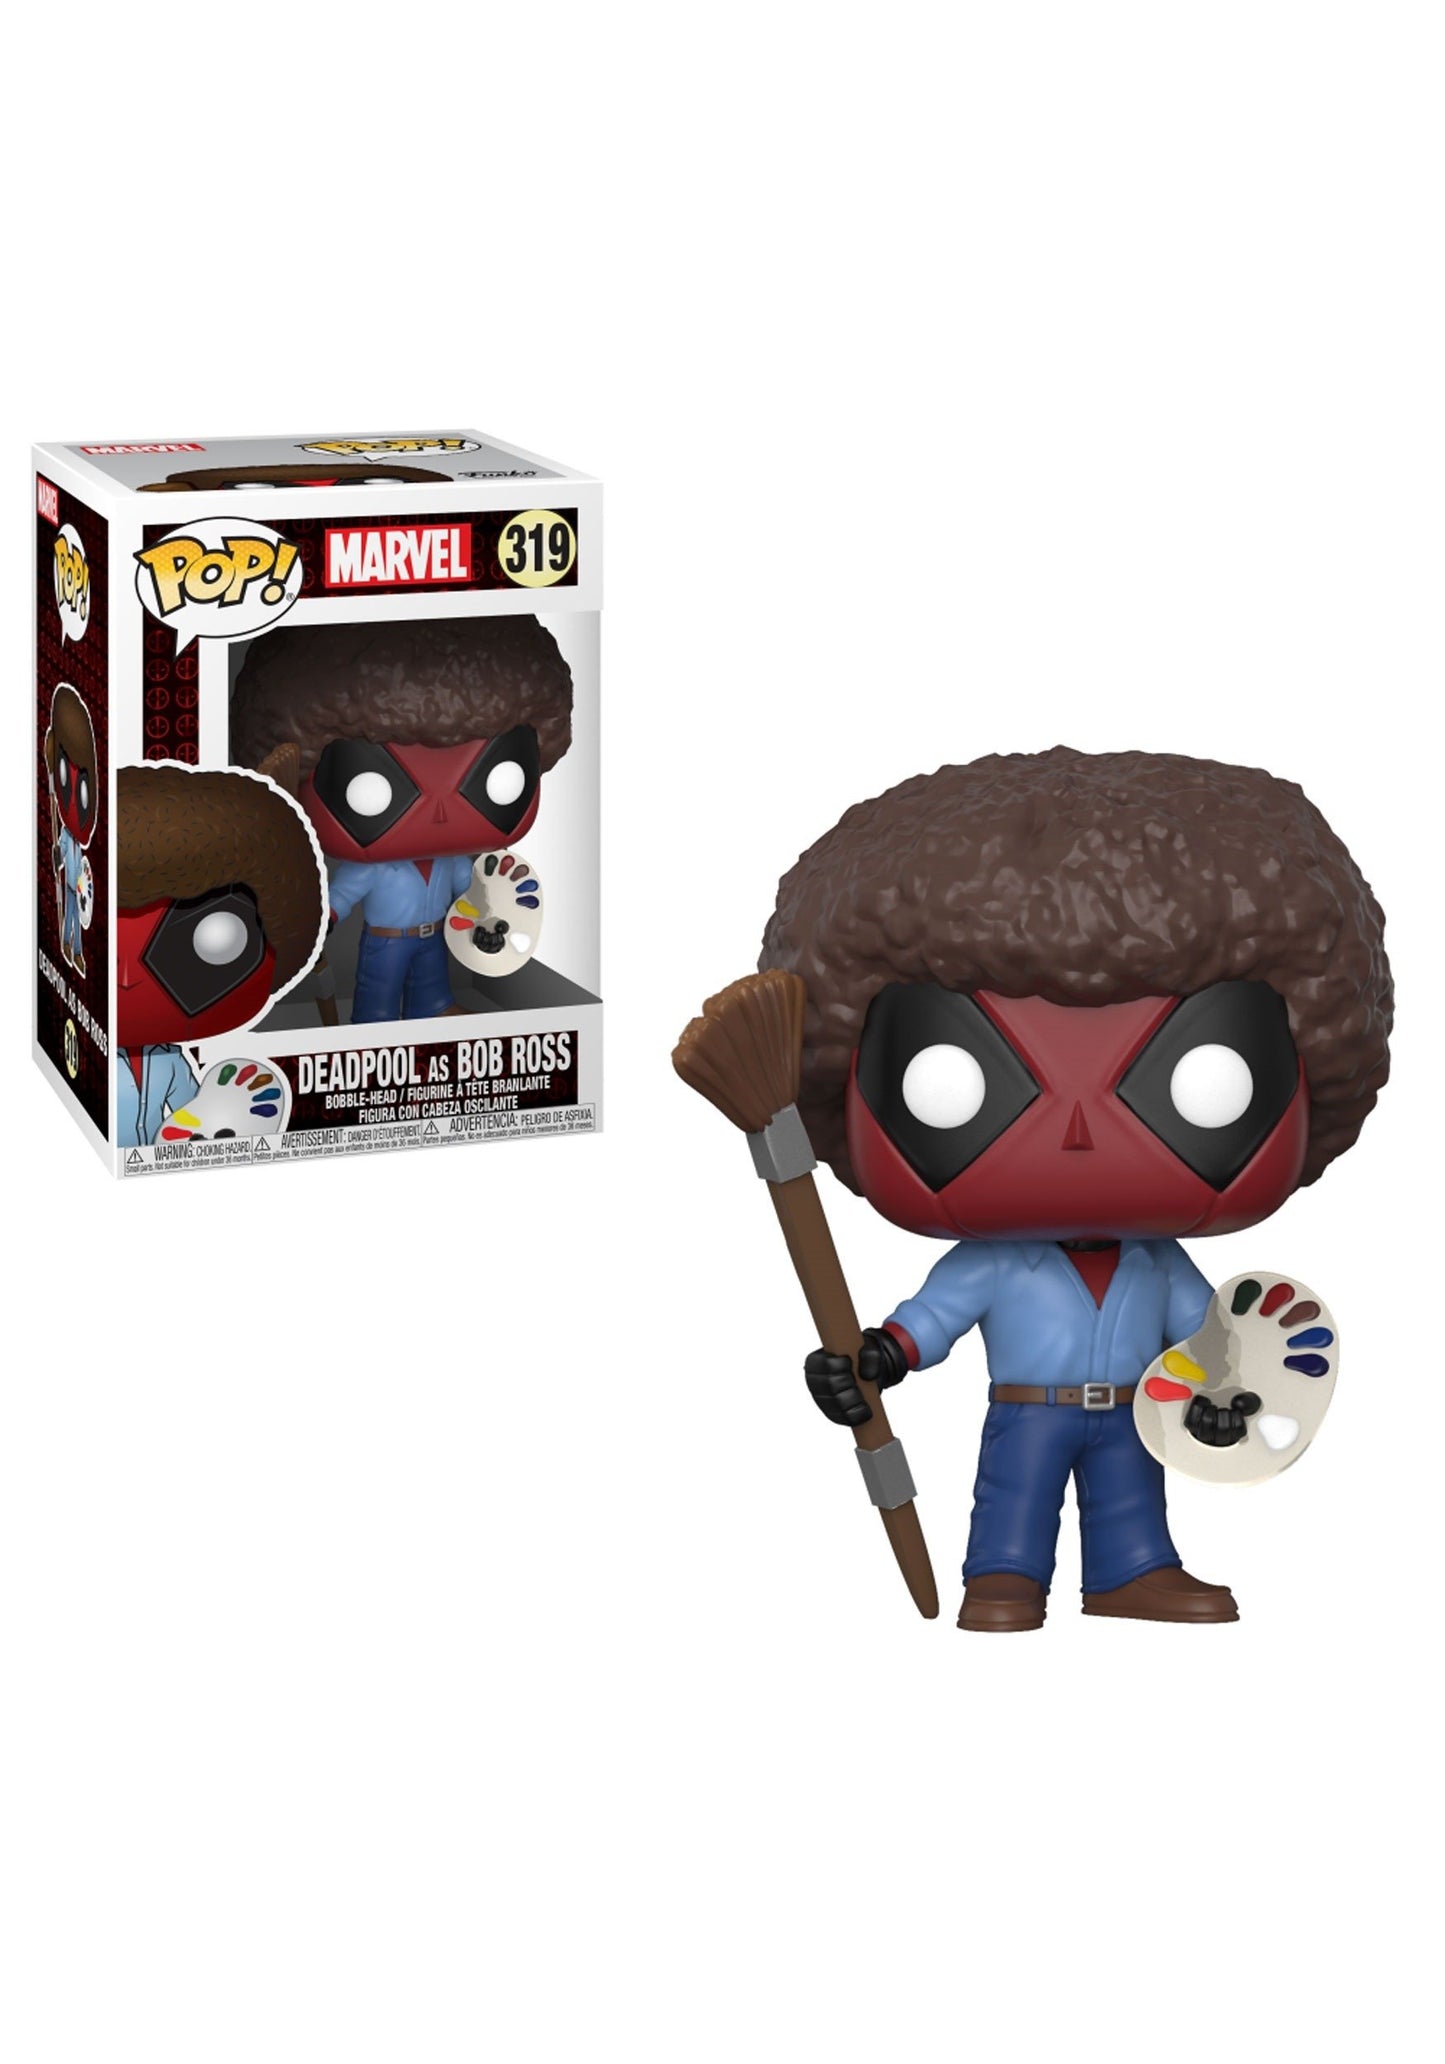 Funko Deadpool Bob Ross Playtime 70s with Afro POP! Bobble Figure - Deadpool + Bob Ross - Collectible Vinyl Figure - Gift Idea - Official Merchandise - for Kids & Adults - Movies Fans - amzGamess